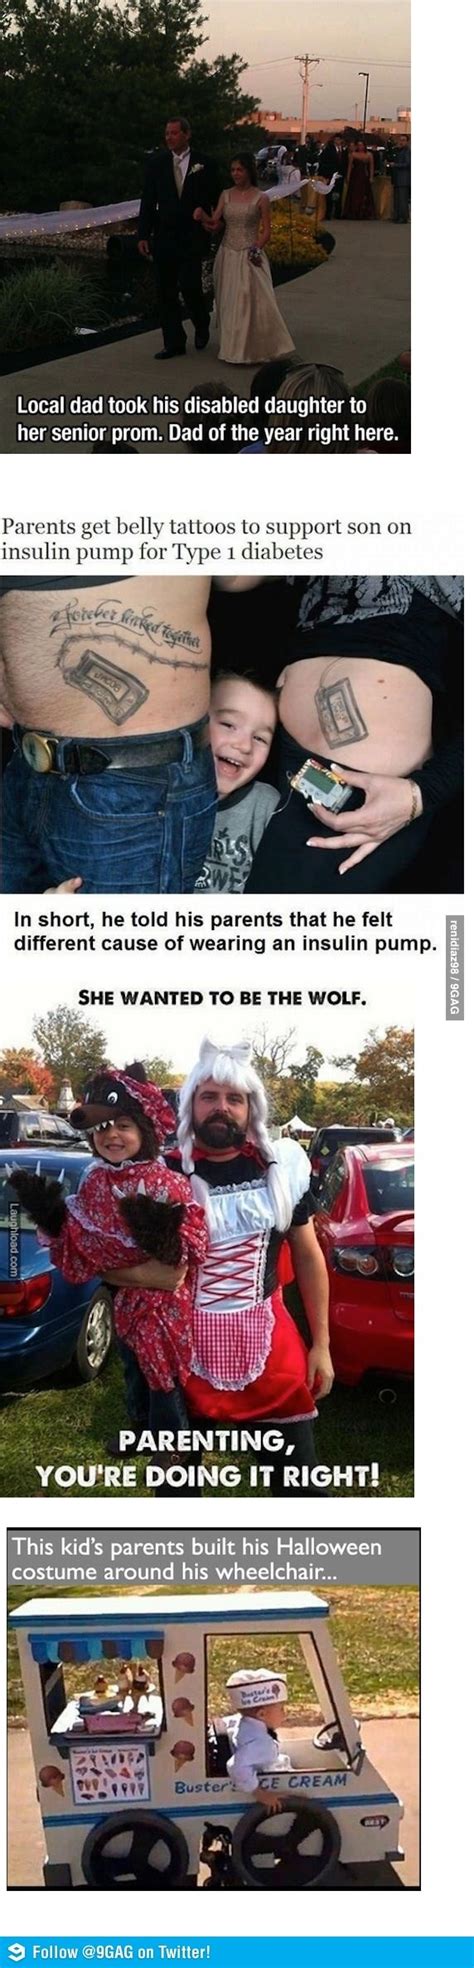 Parenting... youre doing it right! | Parenting done right ...